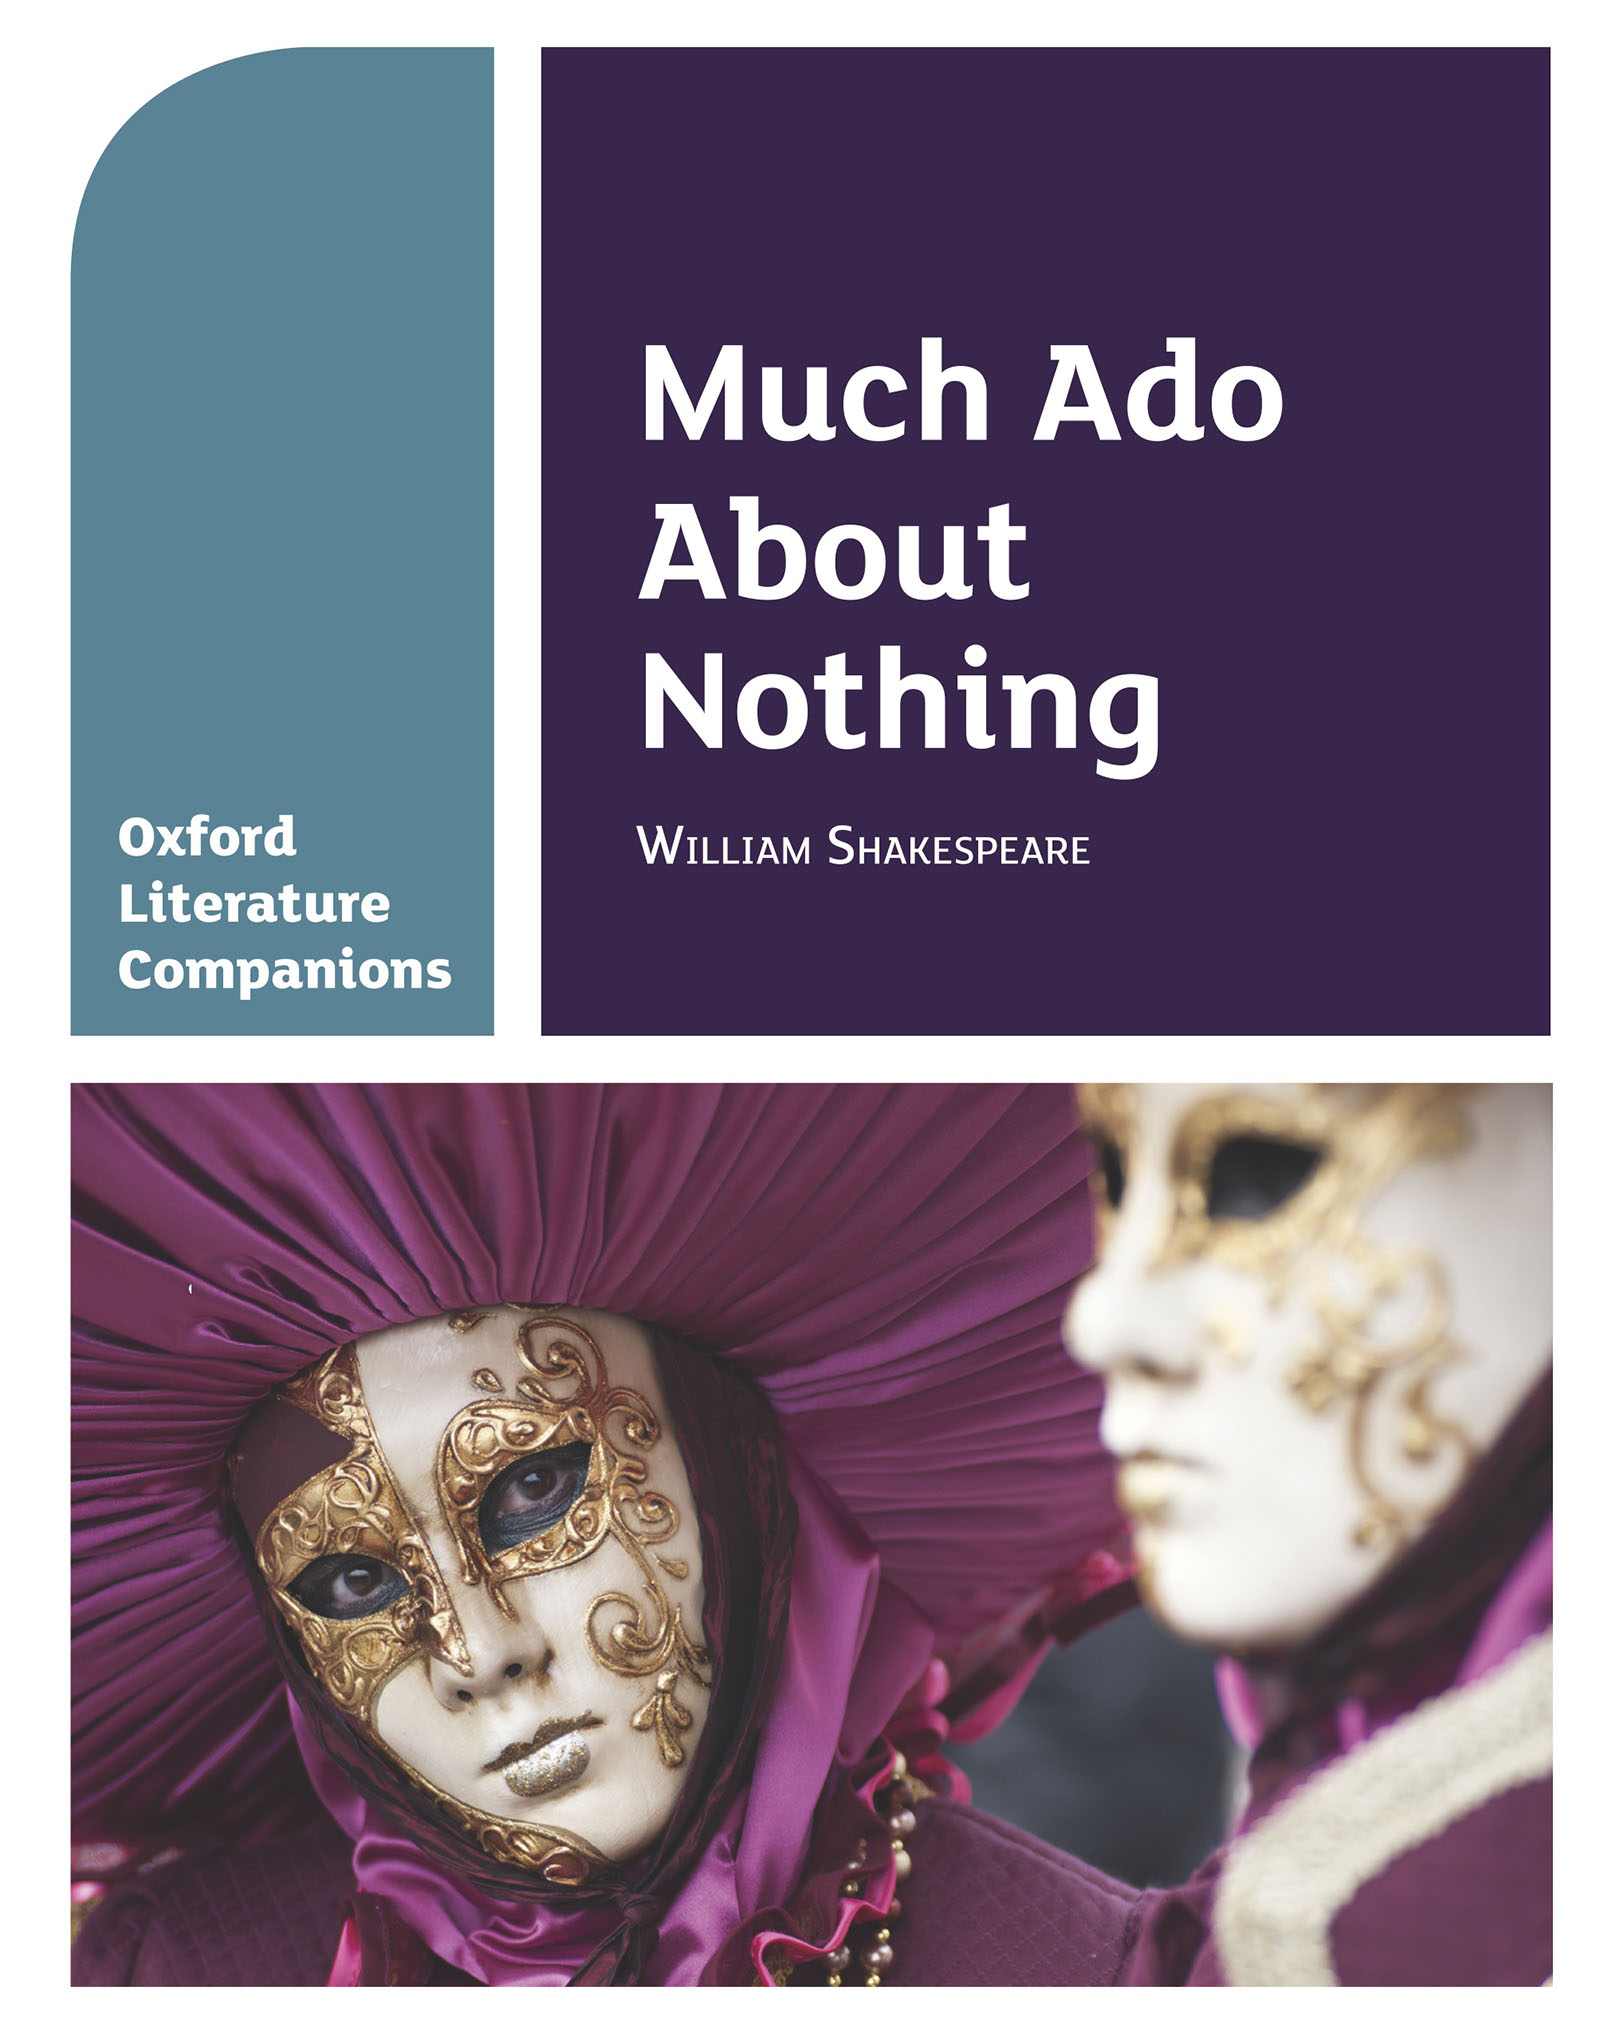 Oxford Literature Companions: Much Ado About Nothing